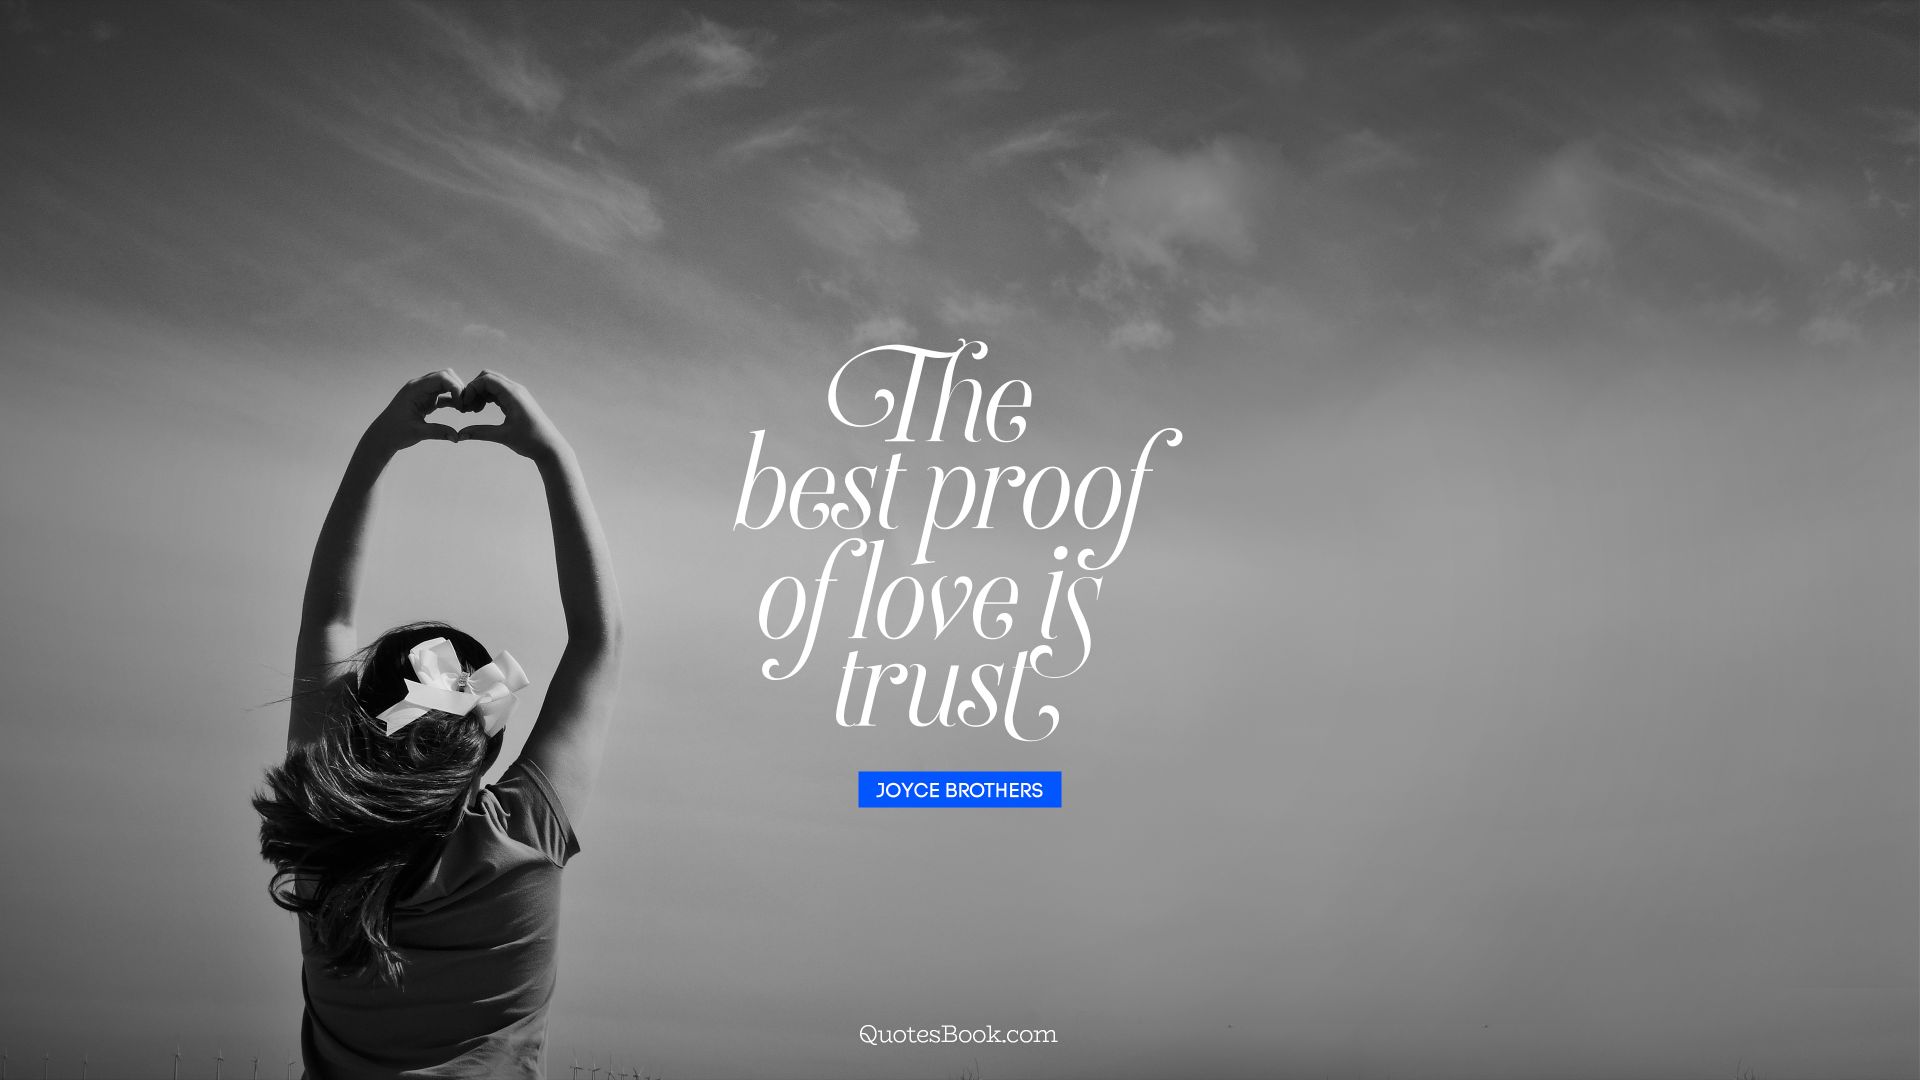 The best proof of love is trust. - Quote by Joyce Brothers